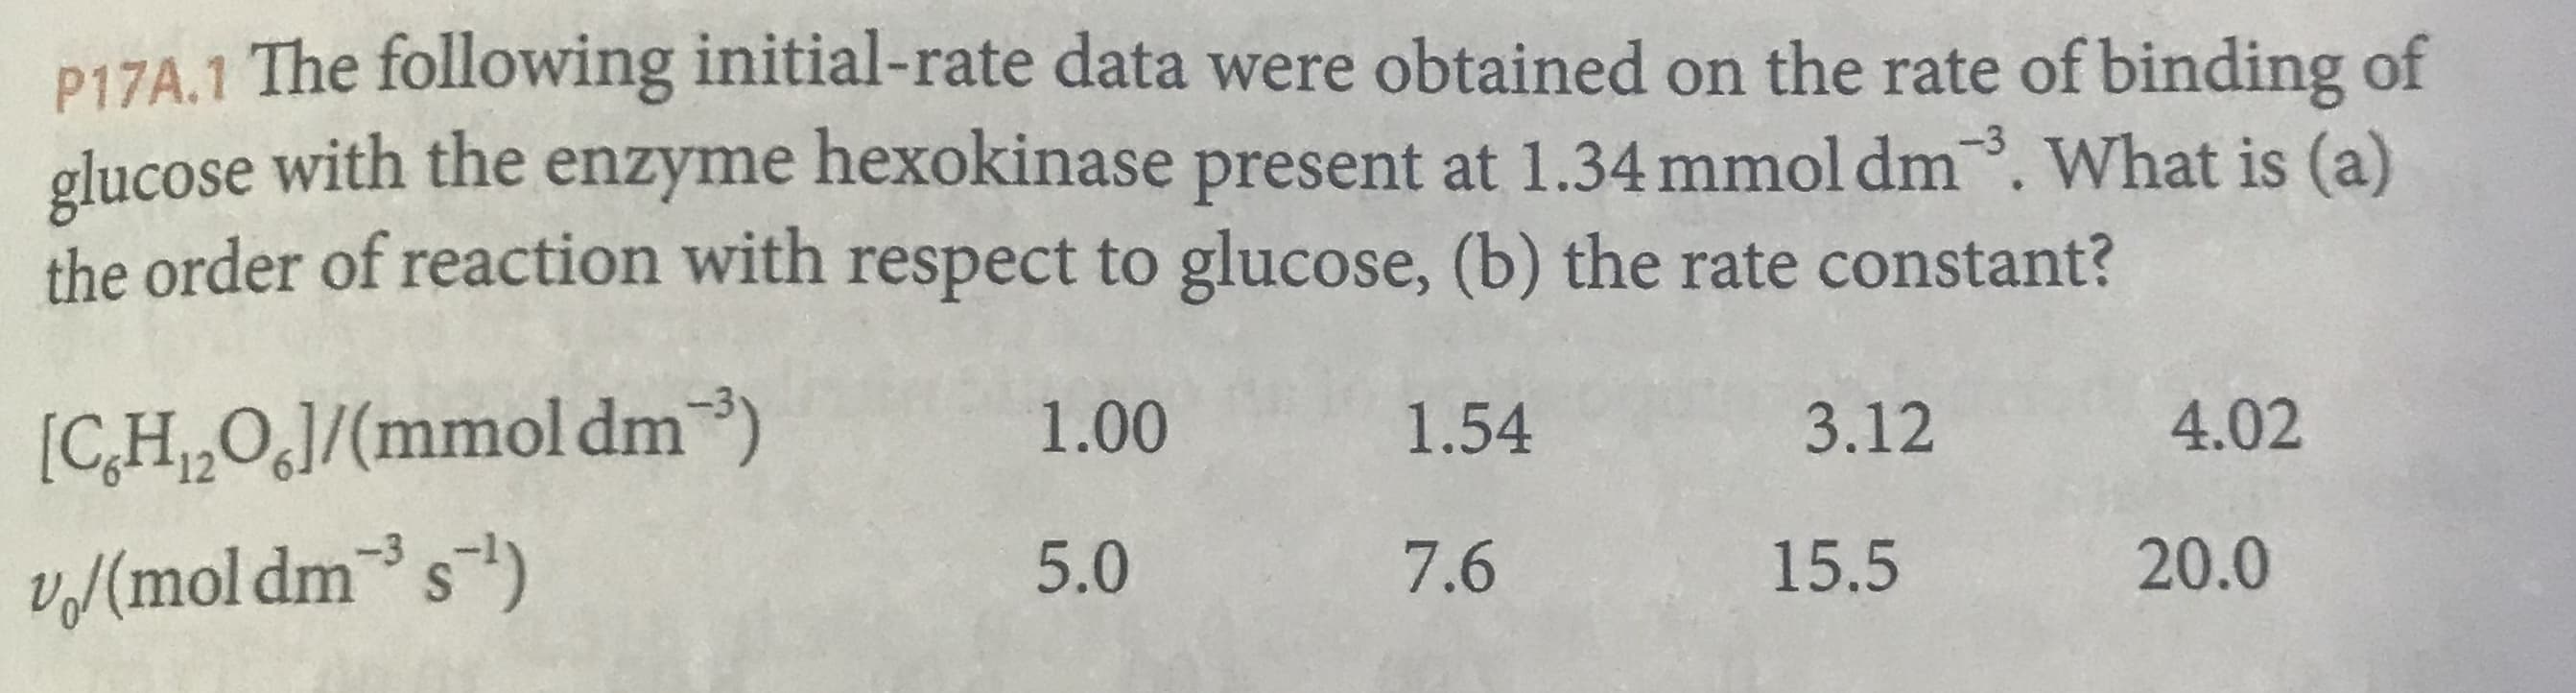 P17A.1 The following initial-rate data were obtained on the rate of binding of
glucose with the enzyme hexokinase present at 1.34 mmol dm What is (a)
the order of reaction with respect to glucose, (b) the rate constant?
4.02
1.00
3.12
1.54
[C,H1,O,]/(mmol dm)
5.0
7.6
20.0
-3
15.5
//mol dm s)
